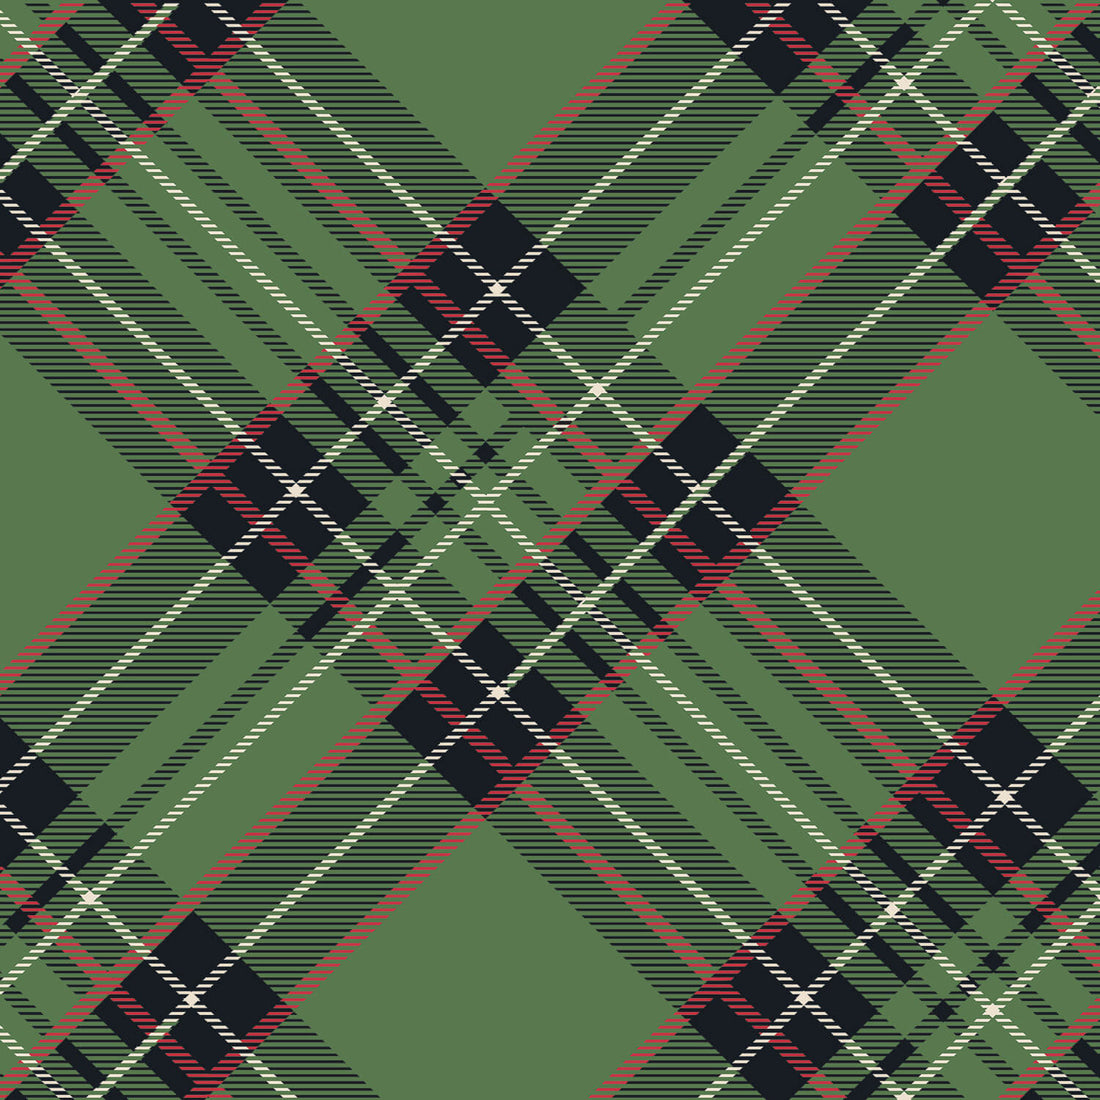 A square cocktail napkin featuring a diagonal plaid pattern of black, red and white over medium green.